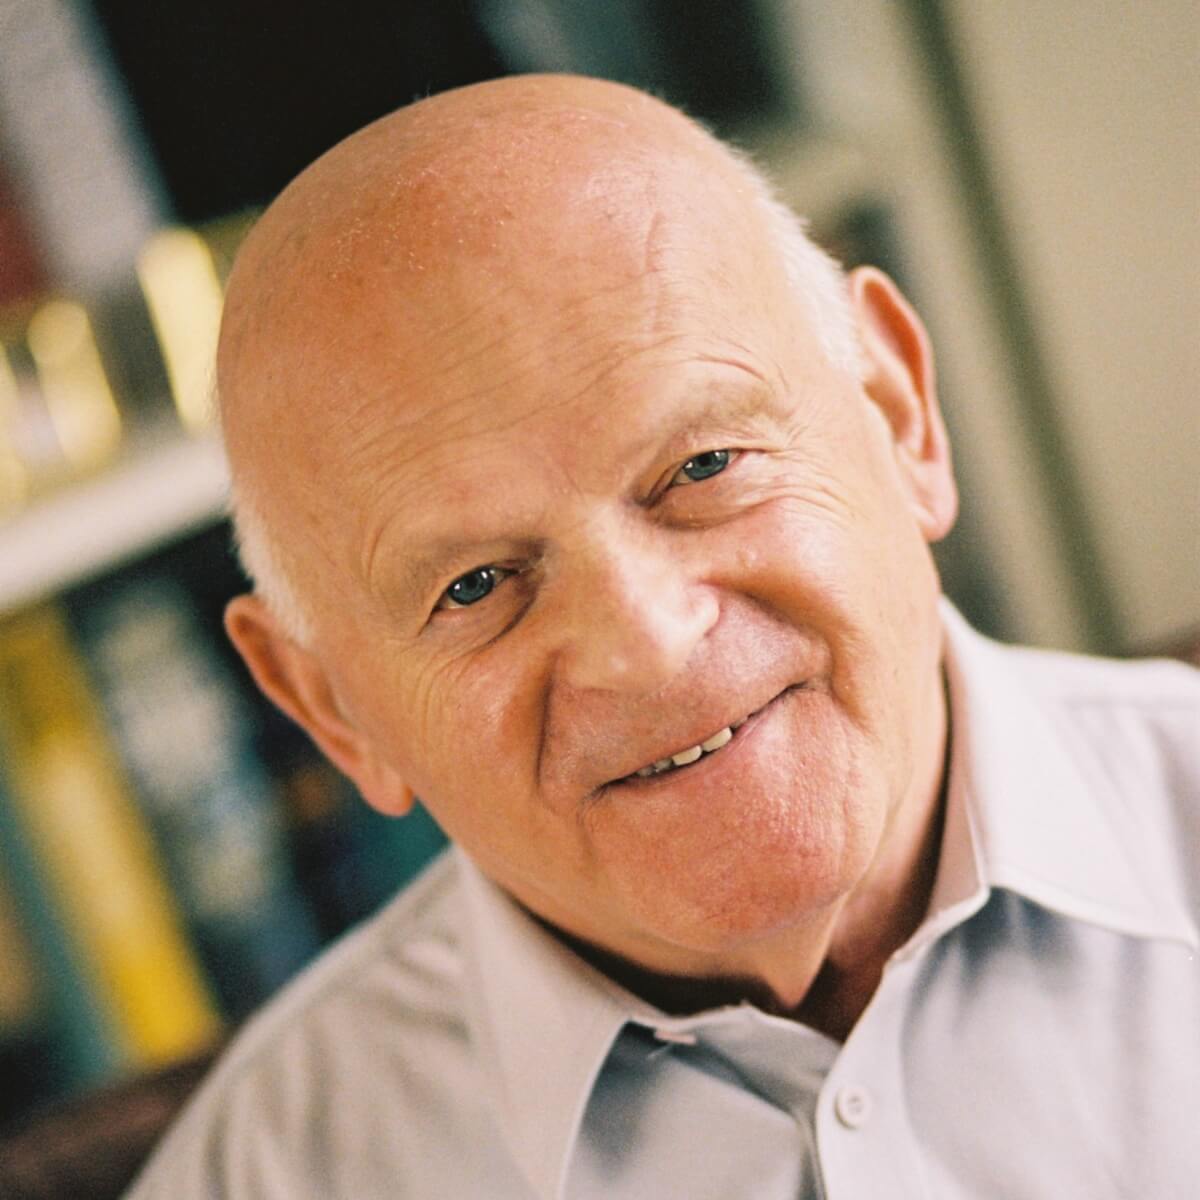 With a strength of spirit to match his strength of frame, Sir Ben Helfgott’s unique and exceptional contribution to Holocaust remembrance and education lives on. No-one could have done more. We were privileged to benefit from his wisdom, and his memory will always be a blessing.